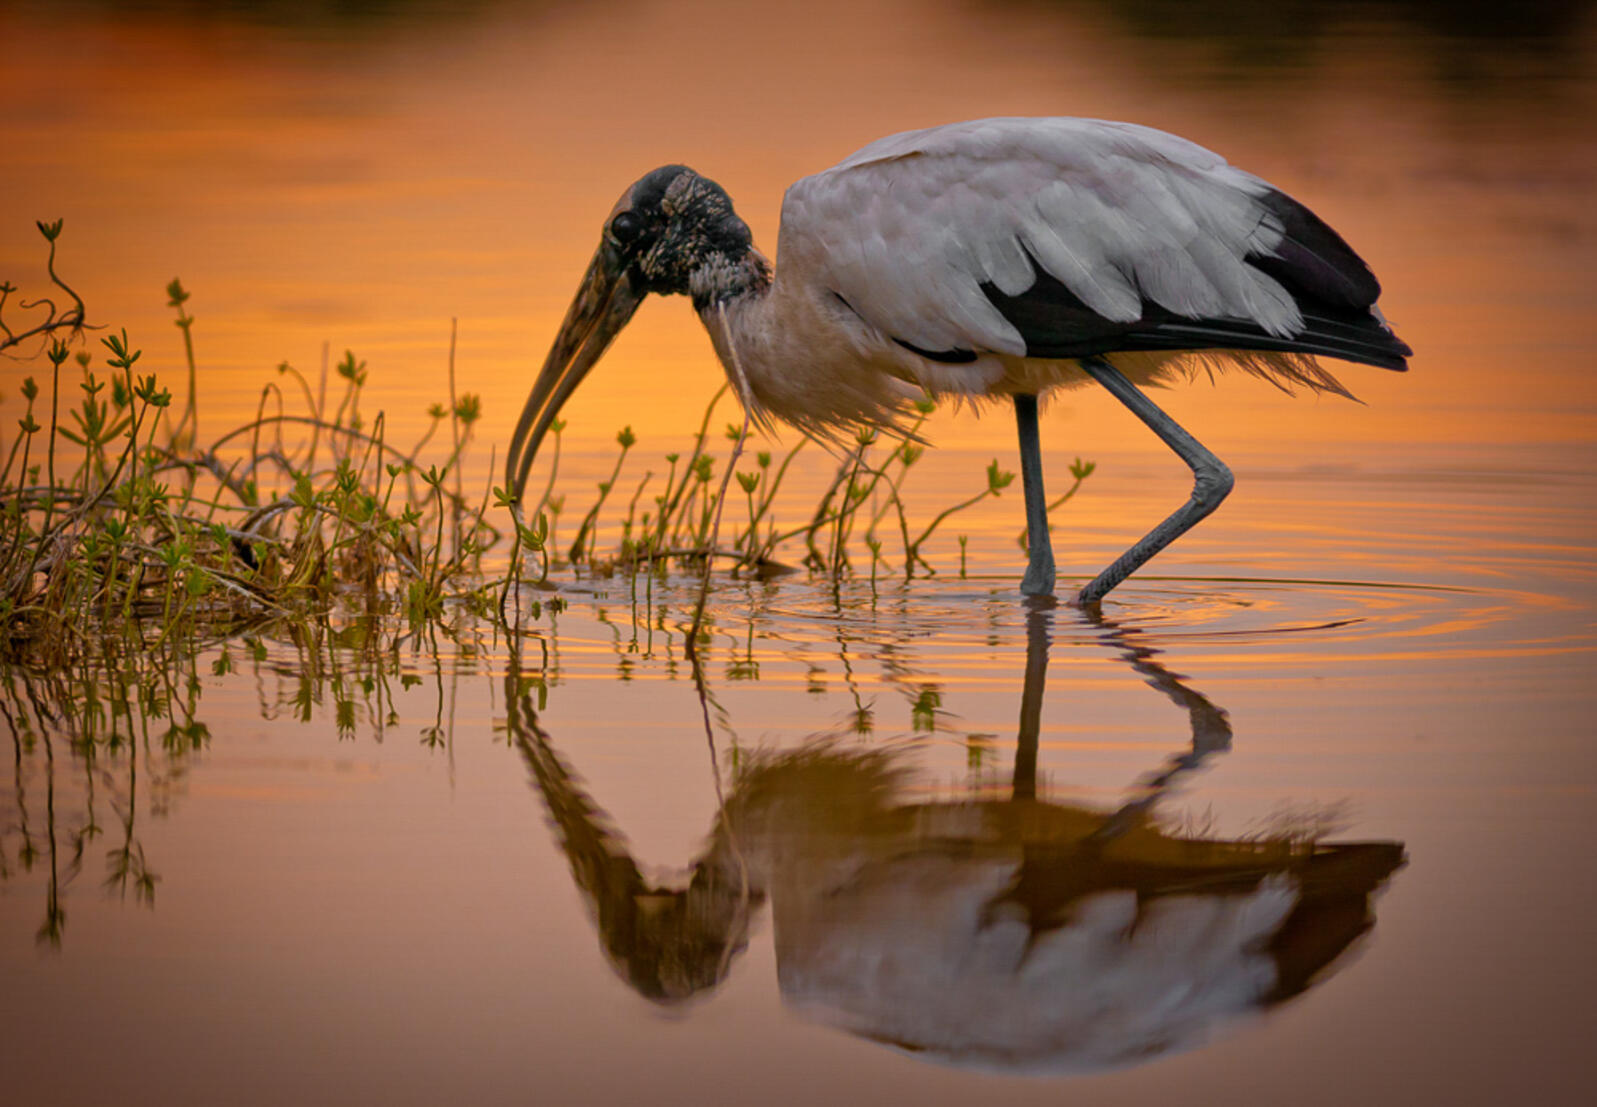 A prehistoric looking wading bird with white body plumage, a rough and bumpy skin covered head and long bill forages in a still pond reflecting the orange glow of the setting sun. 